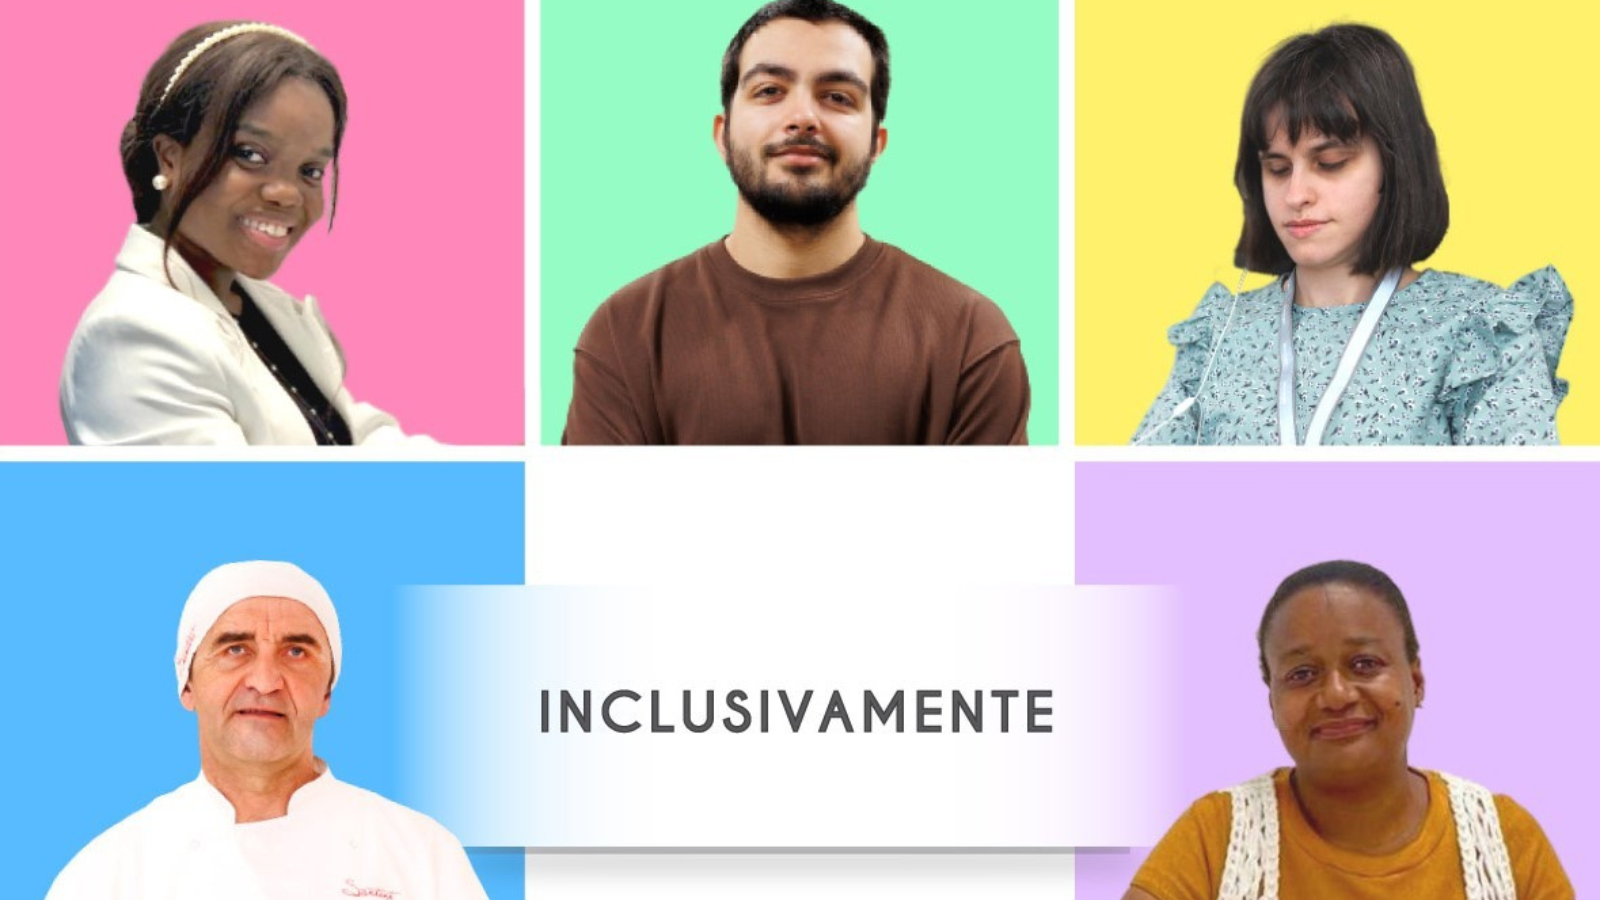 Photo collage of different portraits of people with different disabilities with colorful background